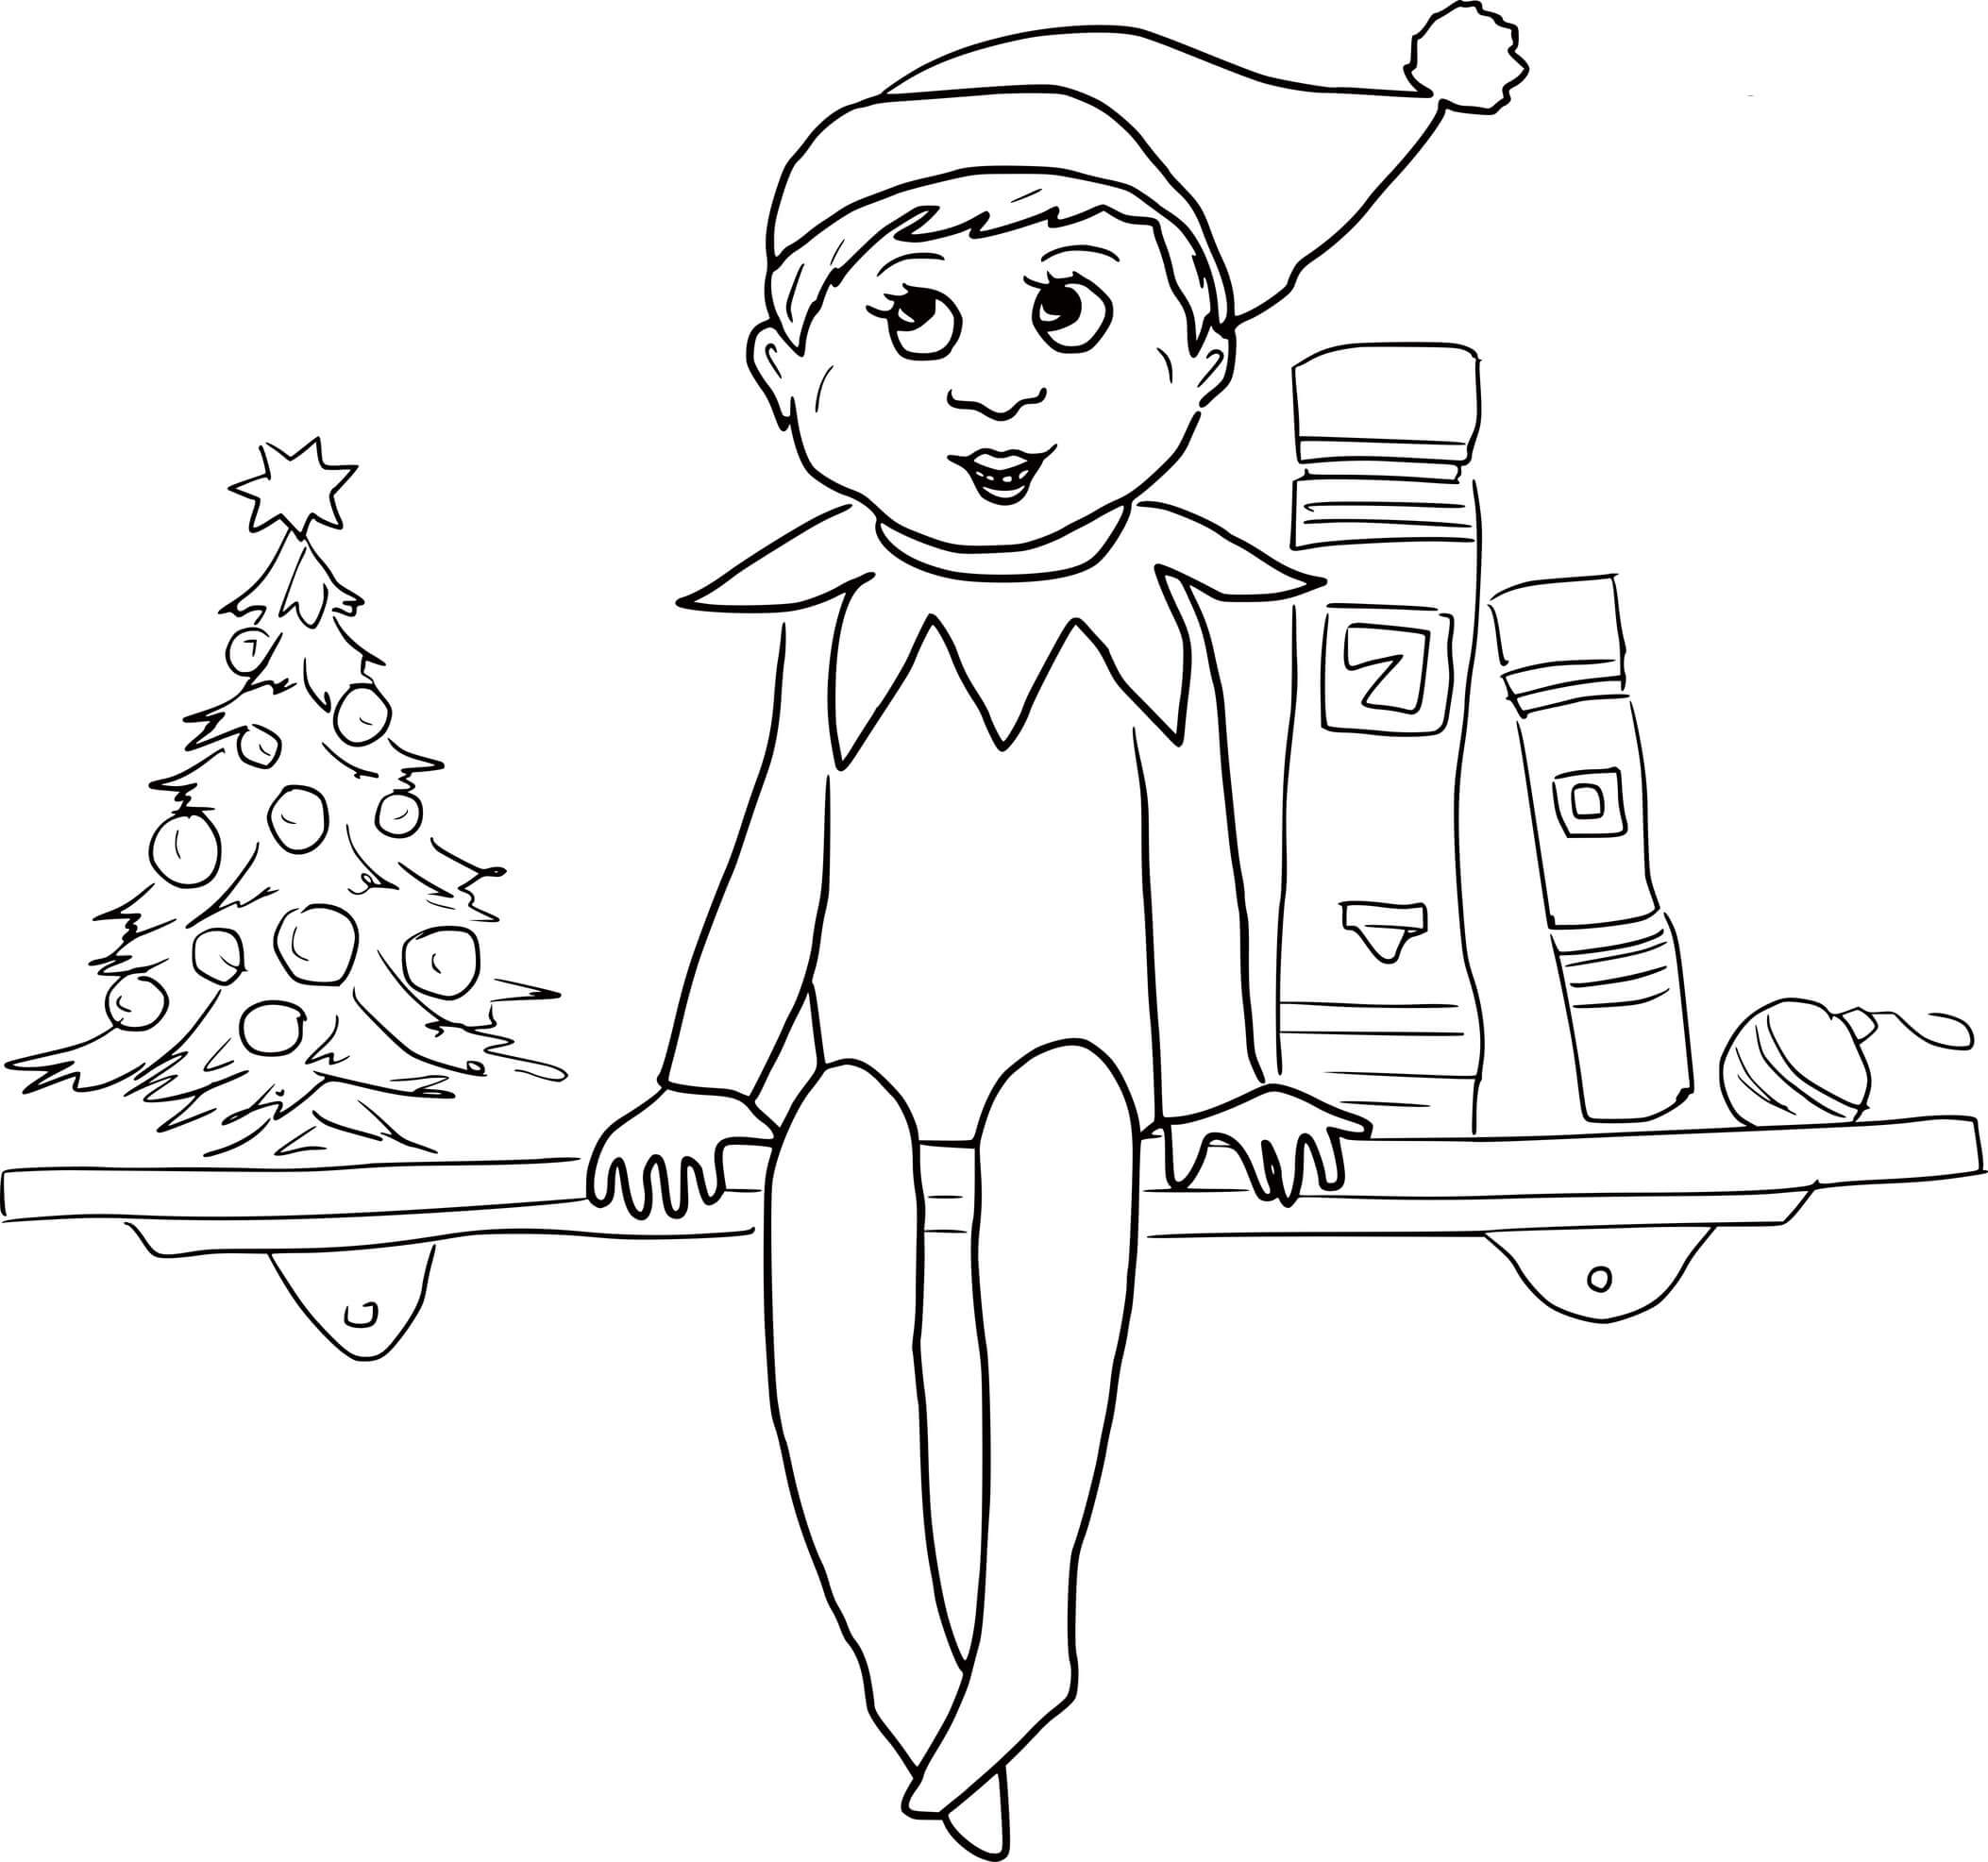 Elf On The Shelf With A Christmas Tree Coloring Page